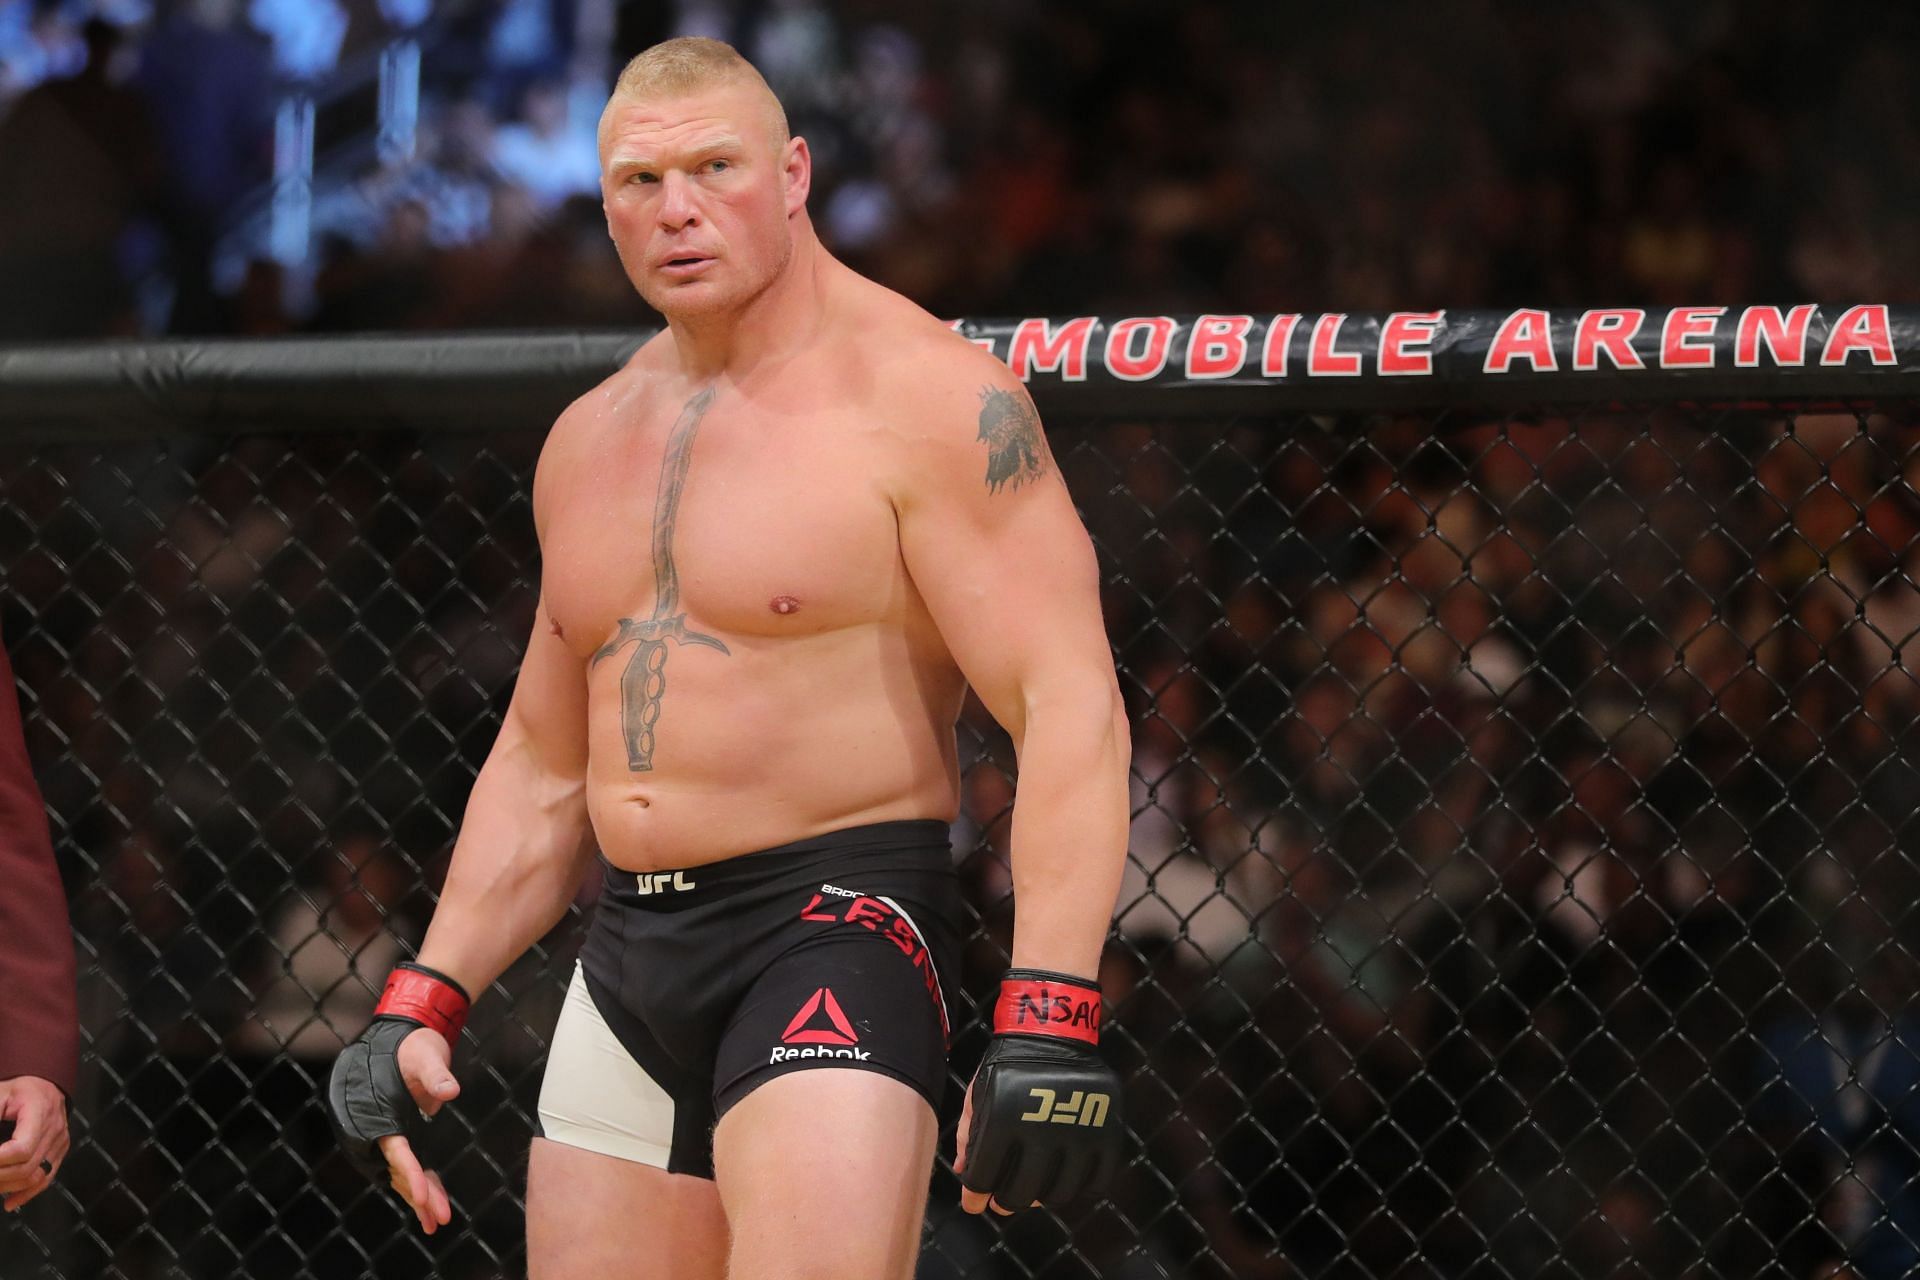 Brock Lesnar recovered from a debut loss to win UFC gold in less than a year